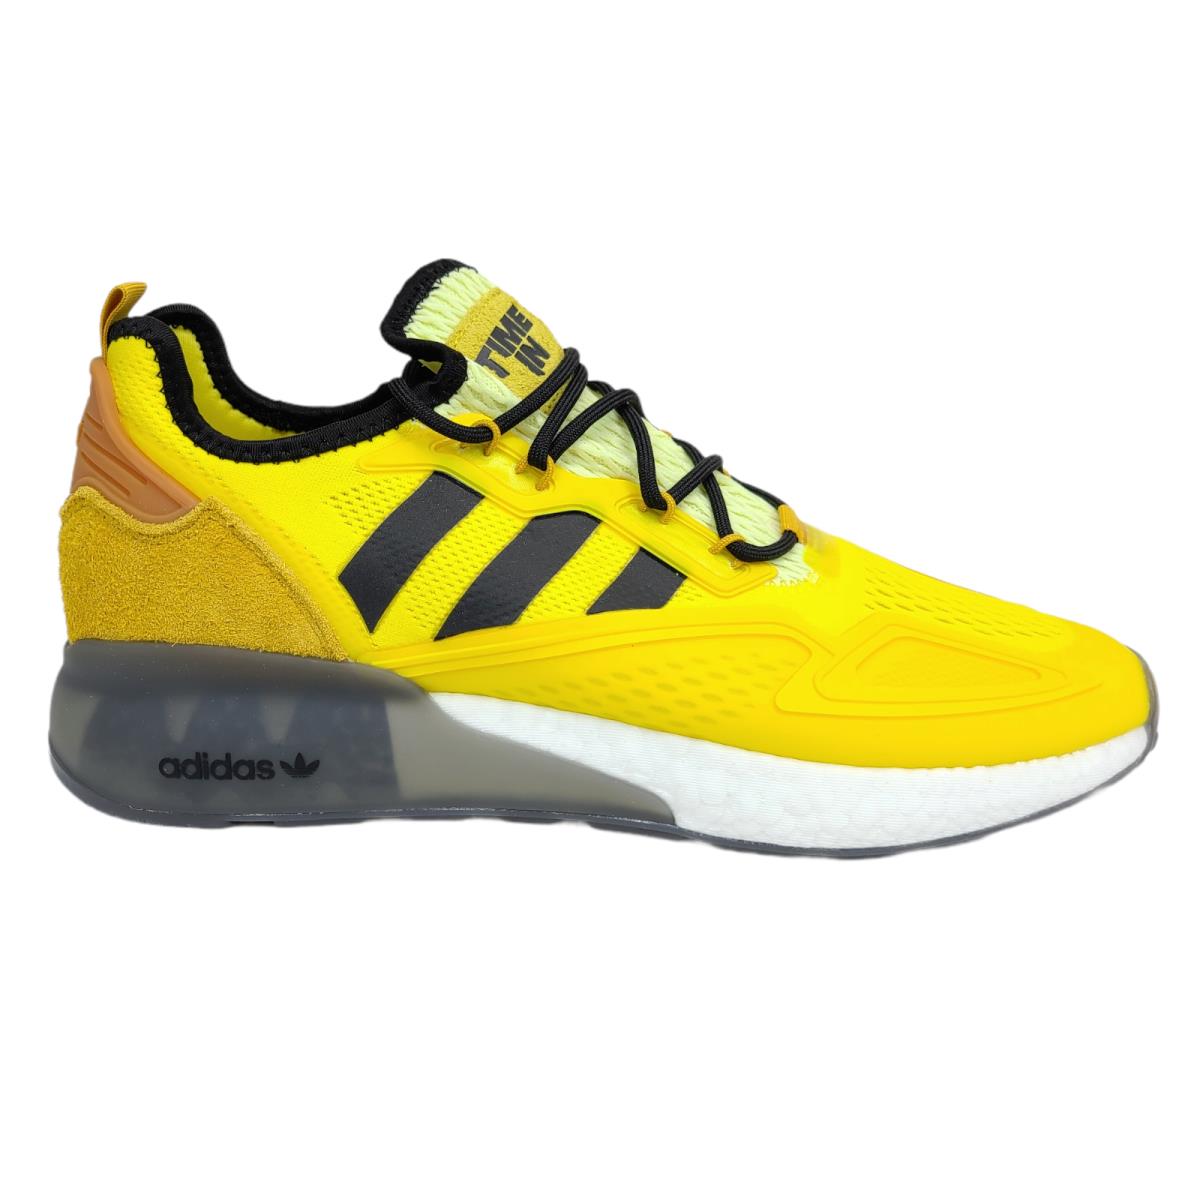 Adidas shoes Boost - Yellow 7